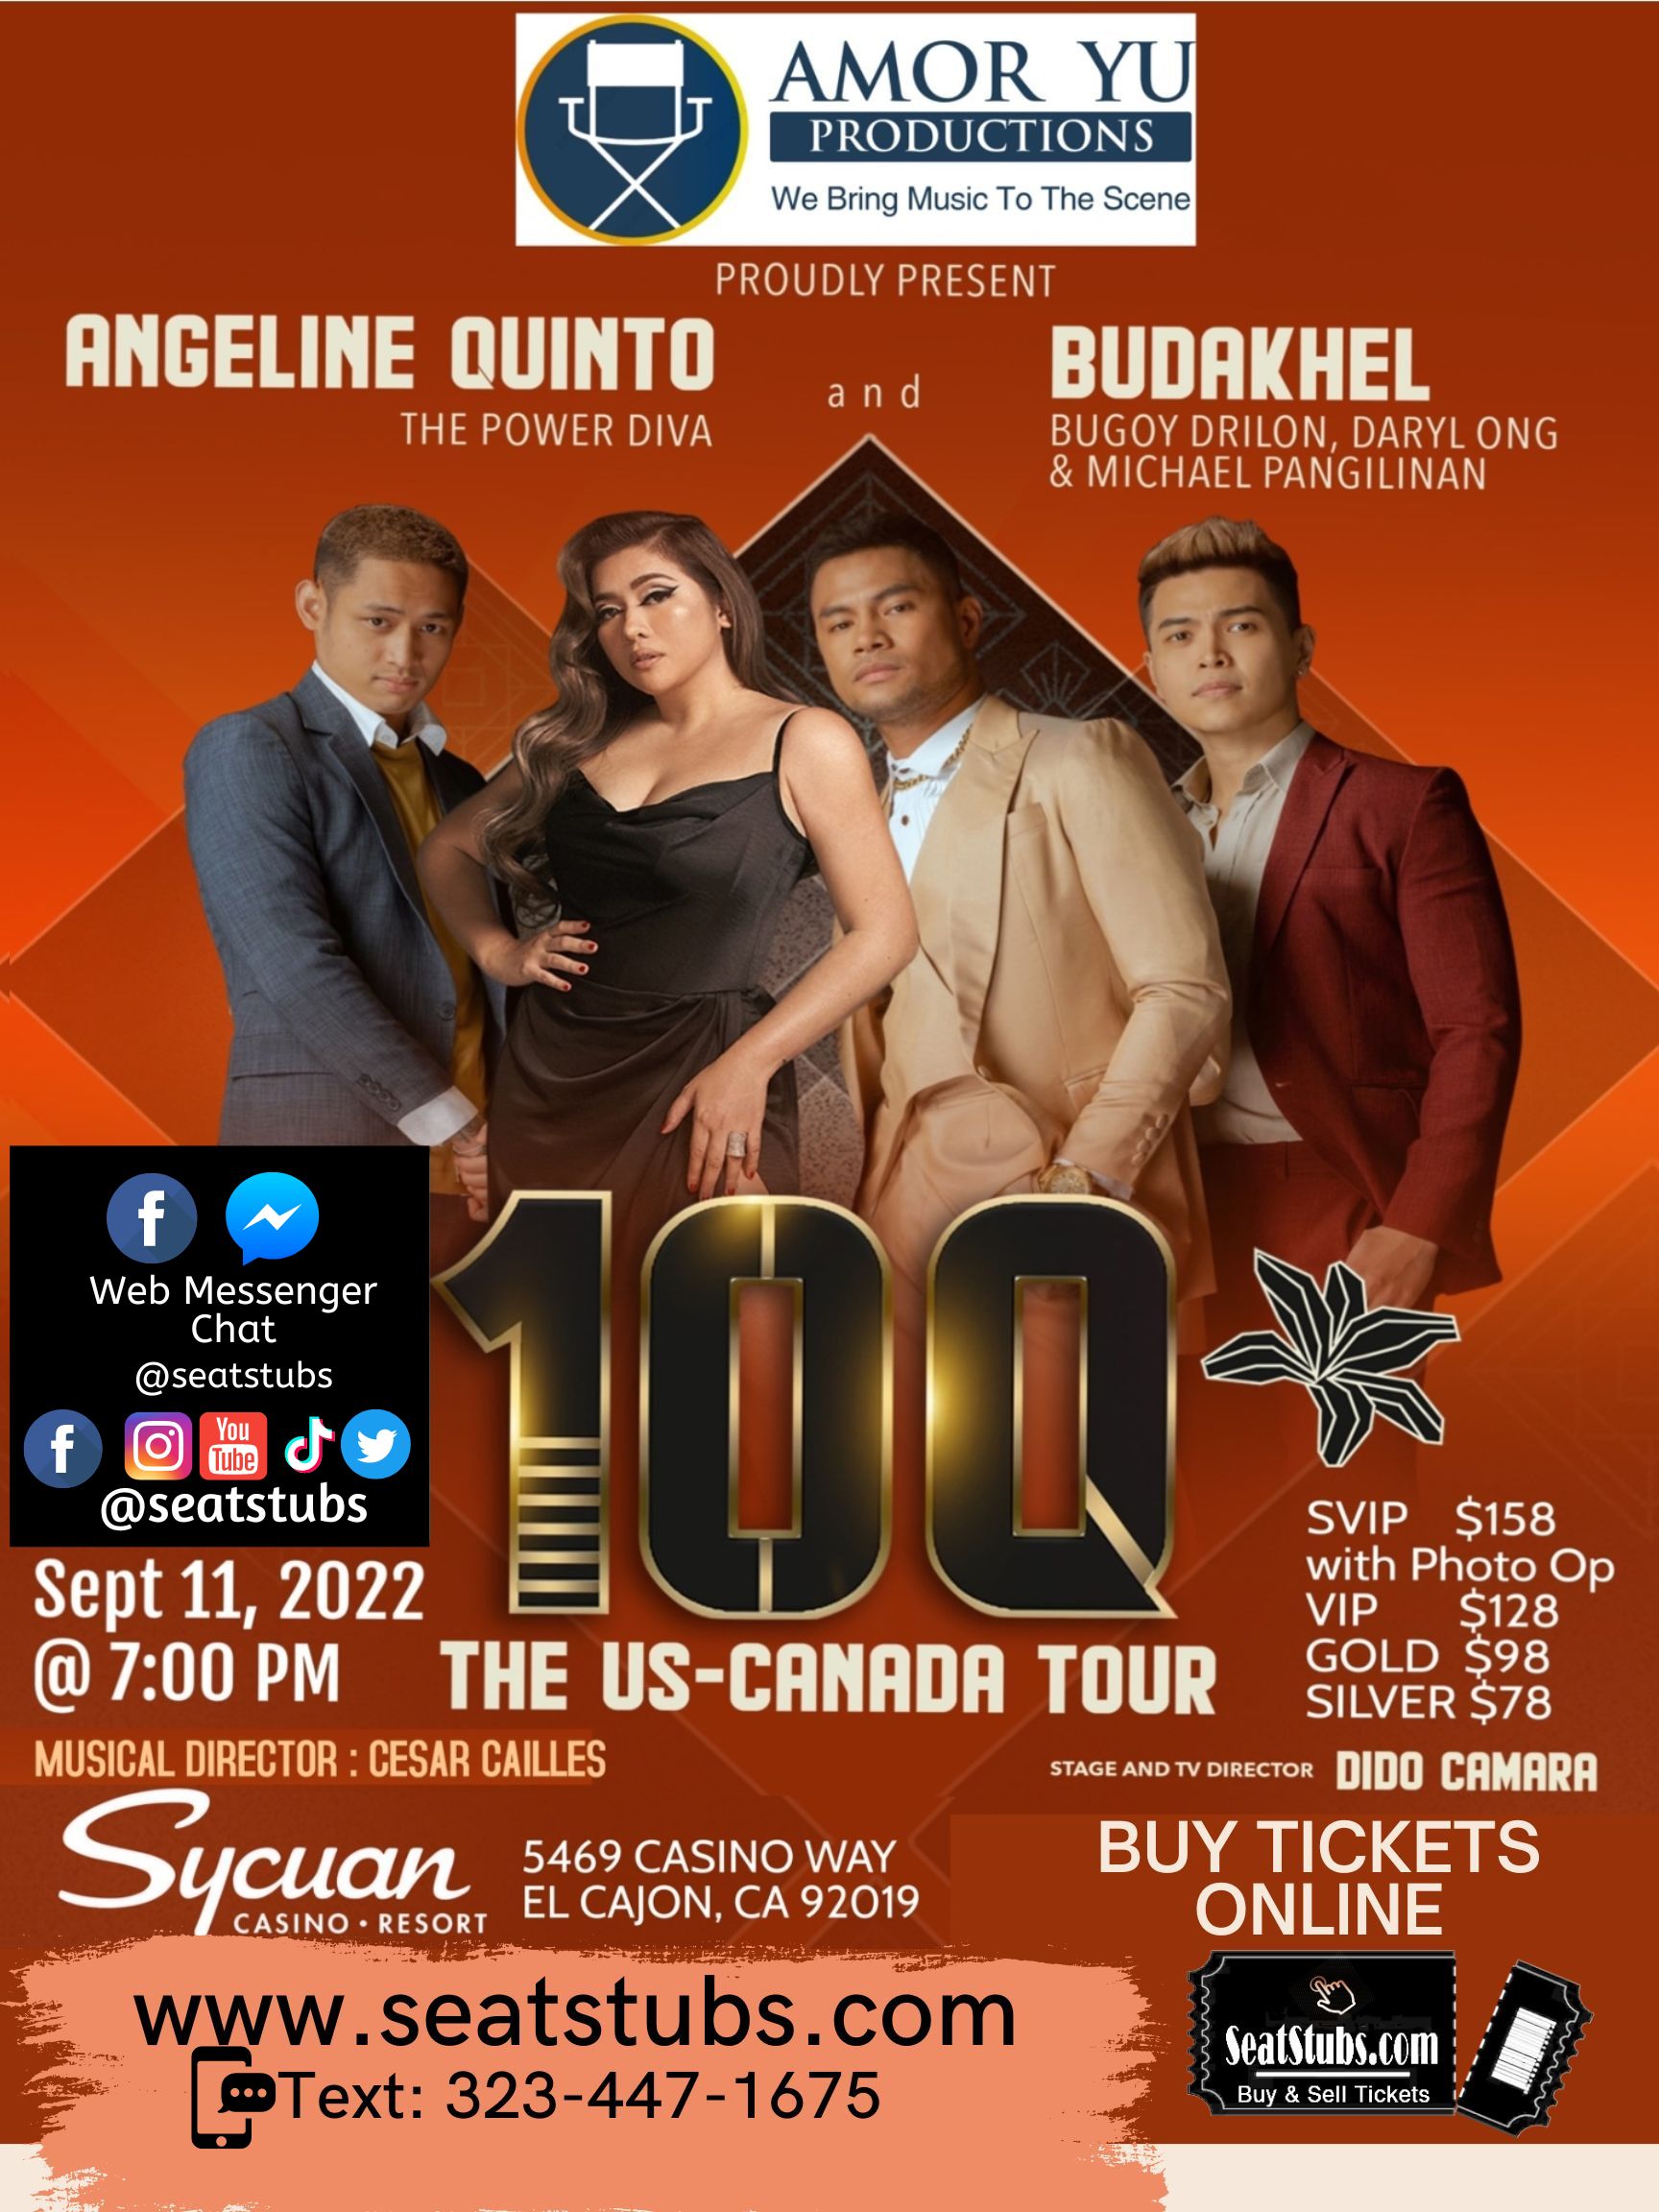 Angeline Quinto with Budakhel Concert in Sycuan Casino Resort September 11, 2022